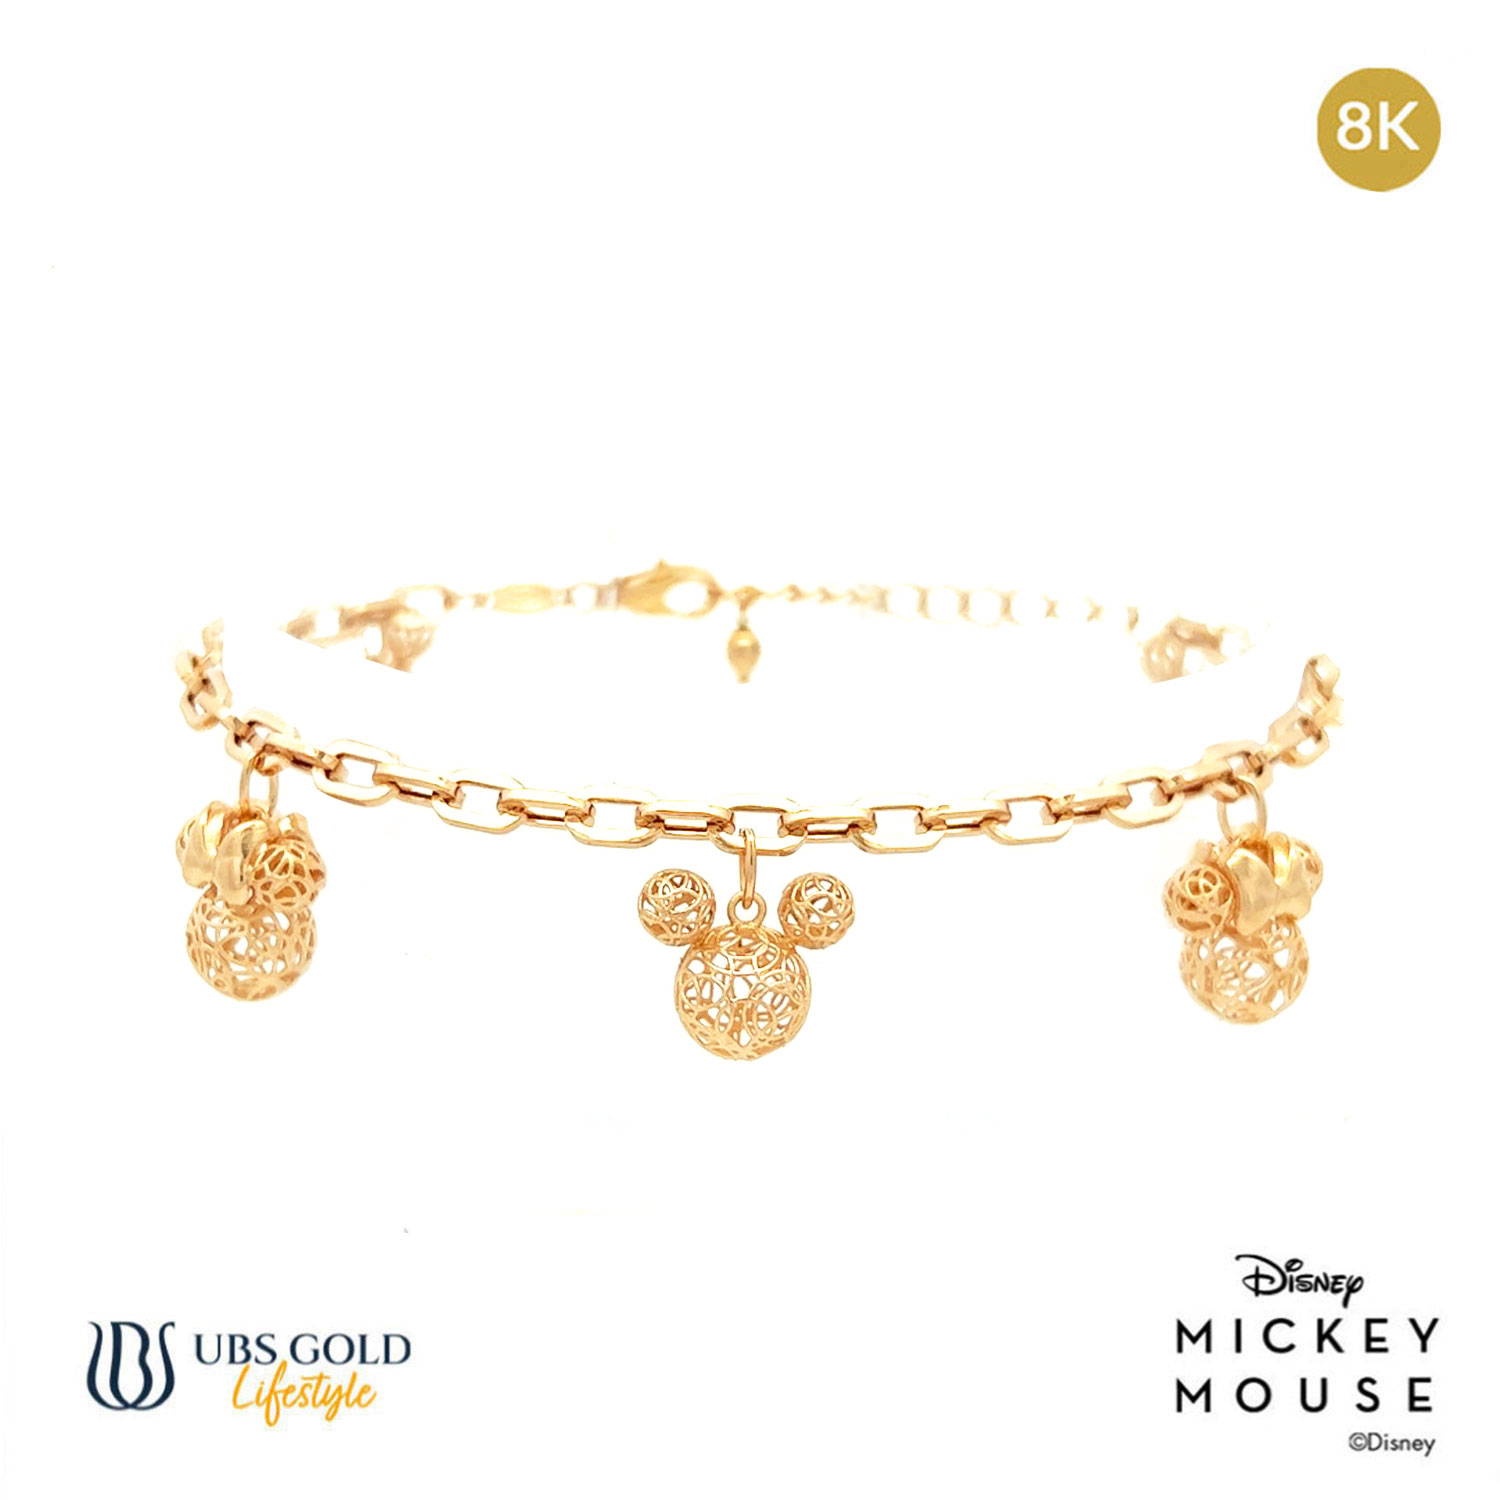 UBS Gold Gelang Emas Disney Mickey Minnie Mouse - Hgy0146K - 8K